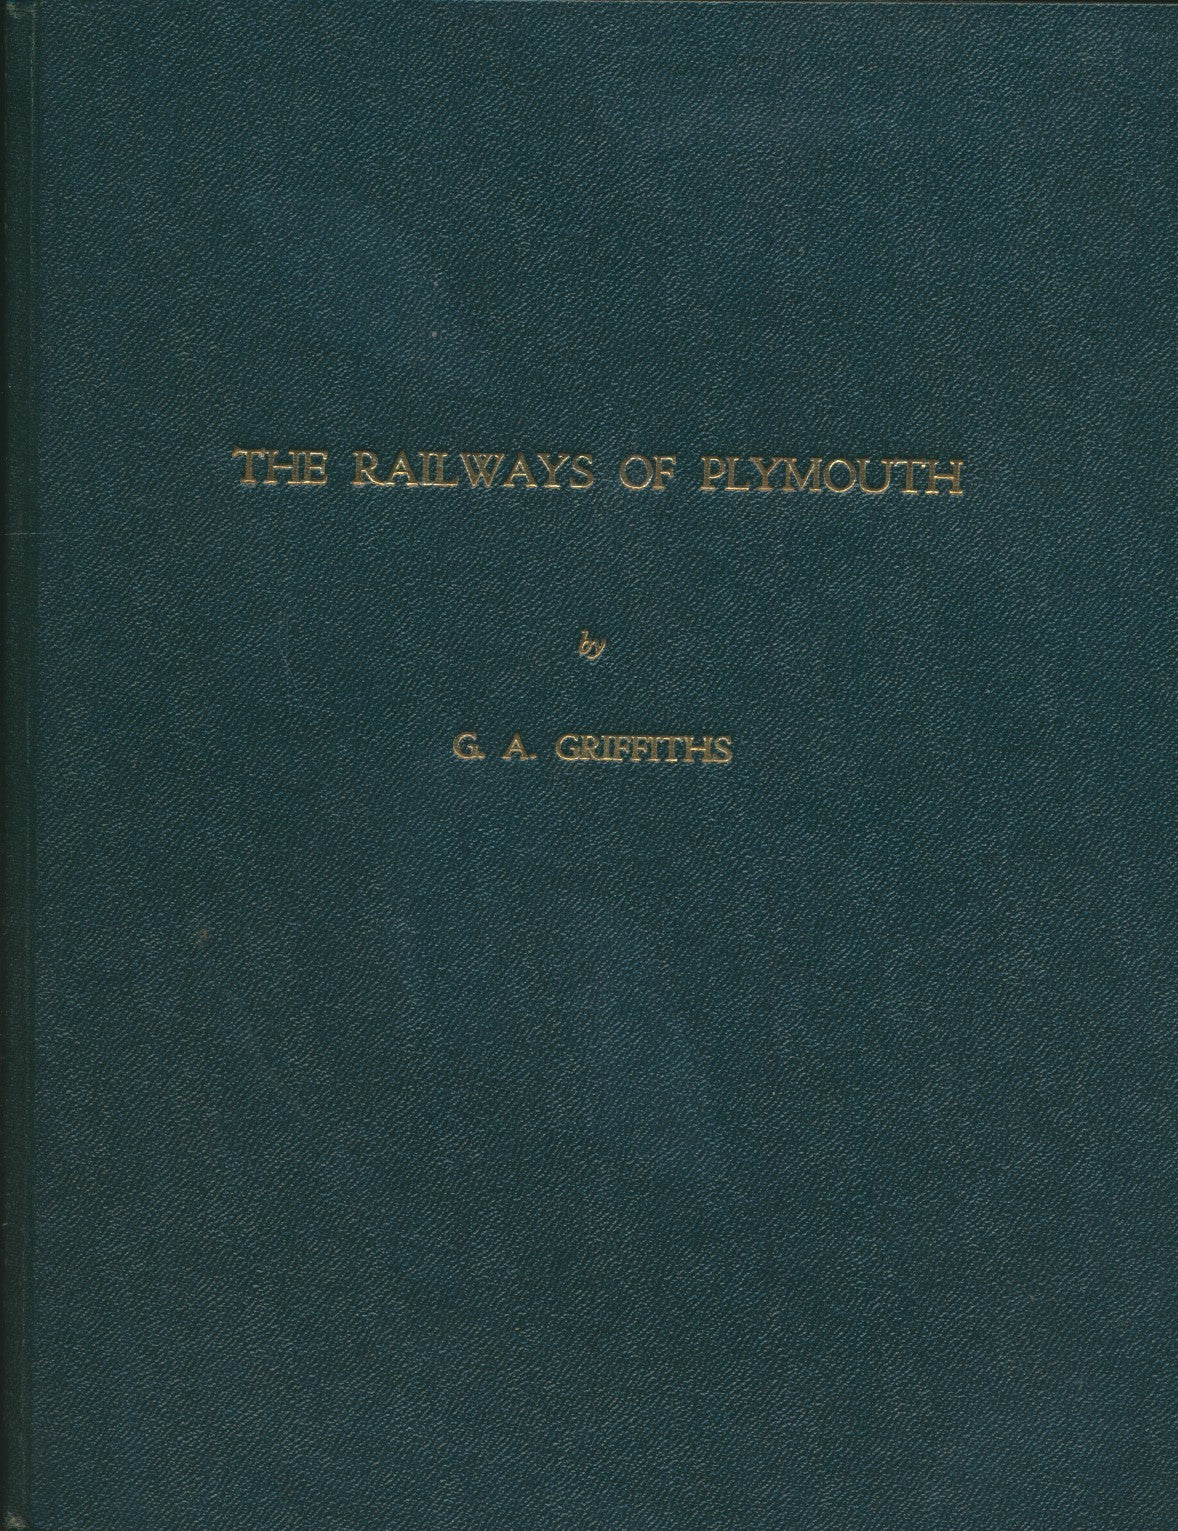 The Railways of Plymouth